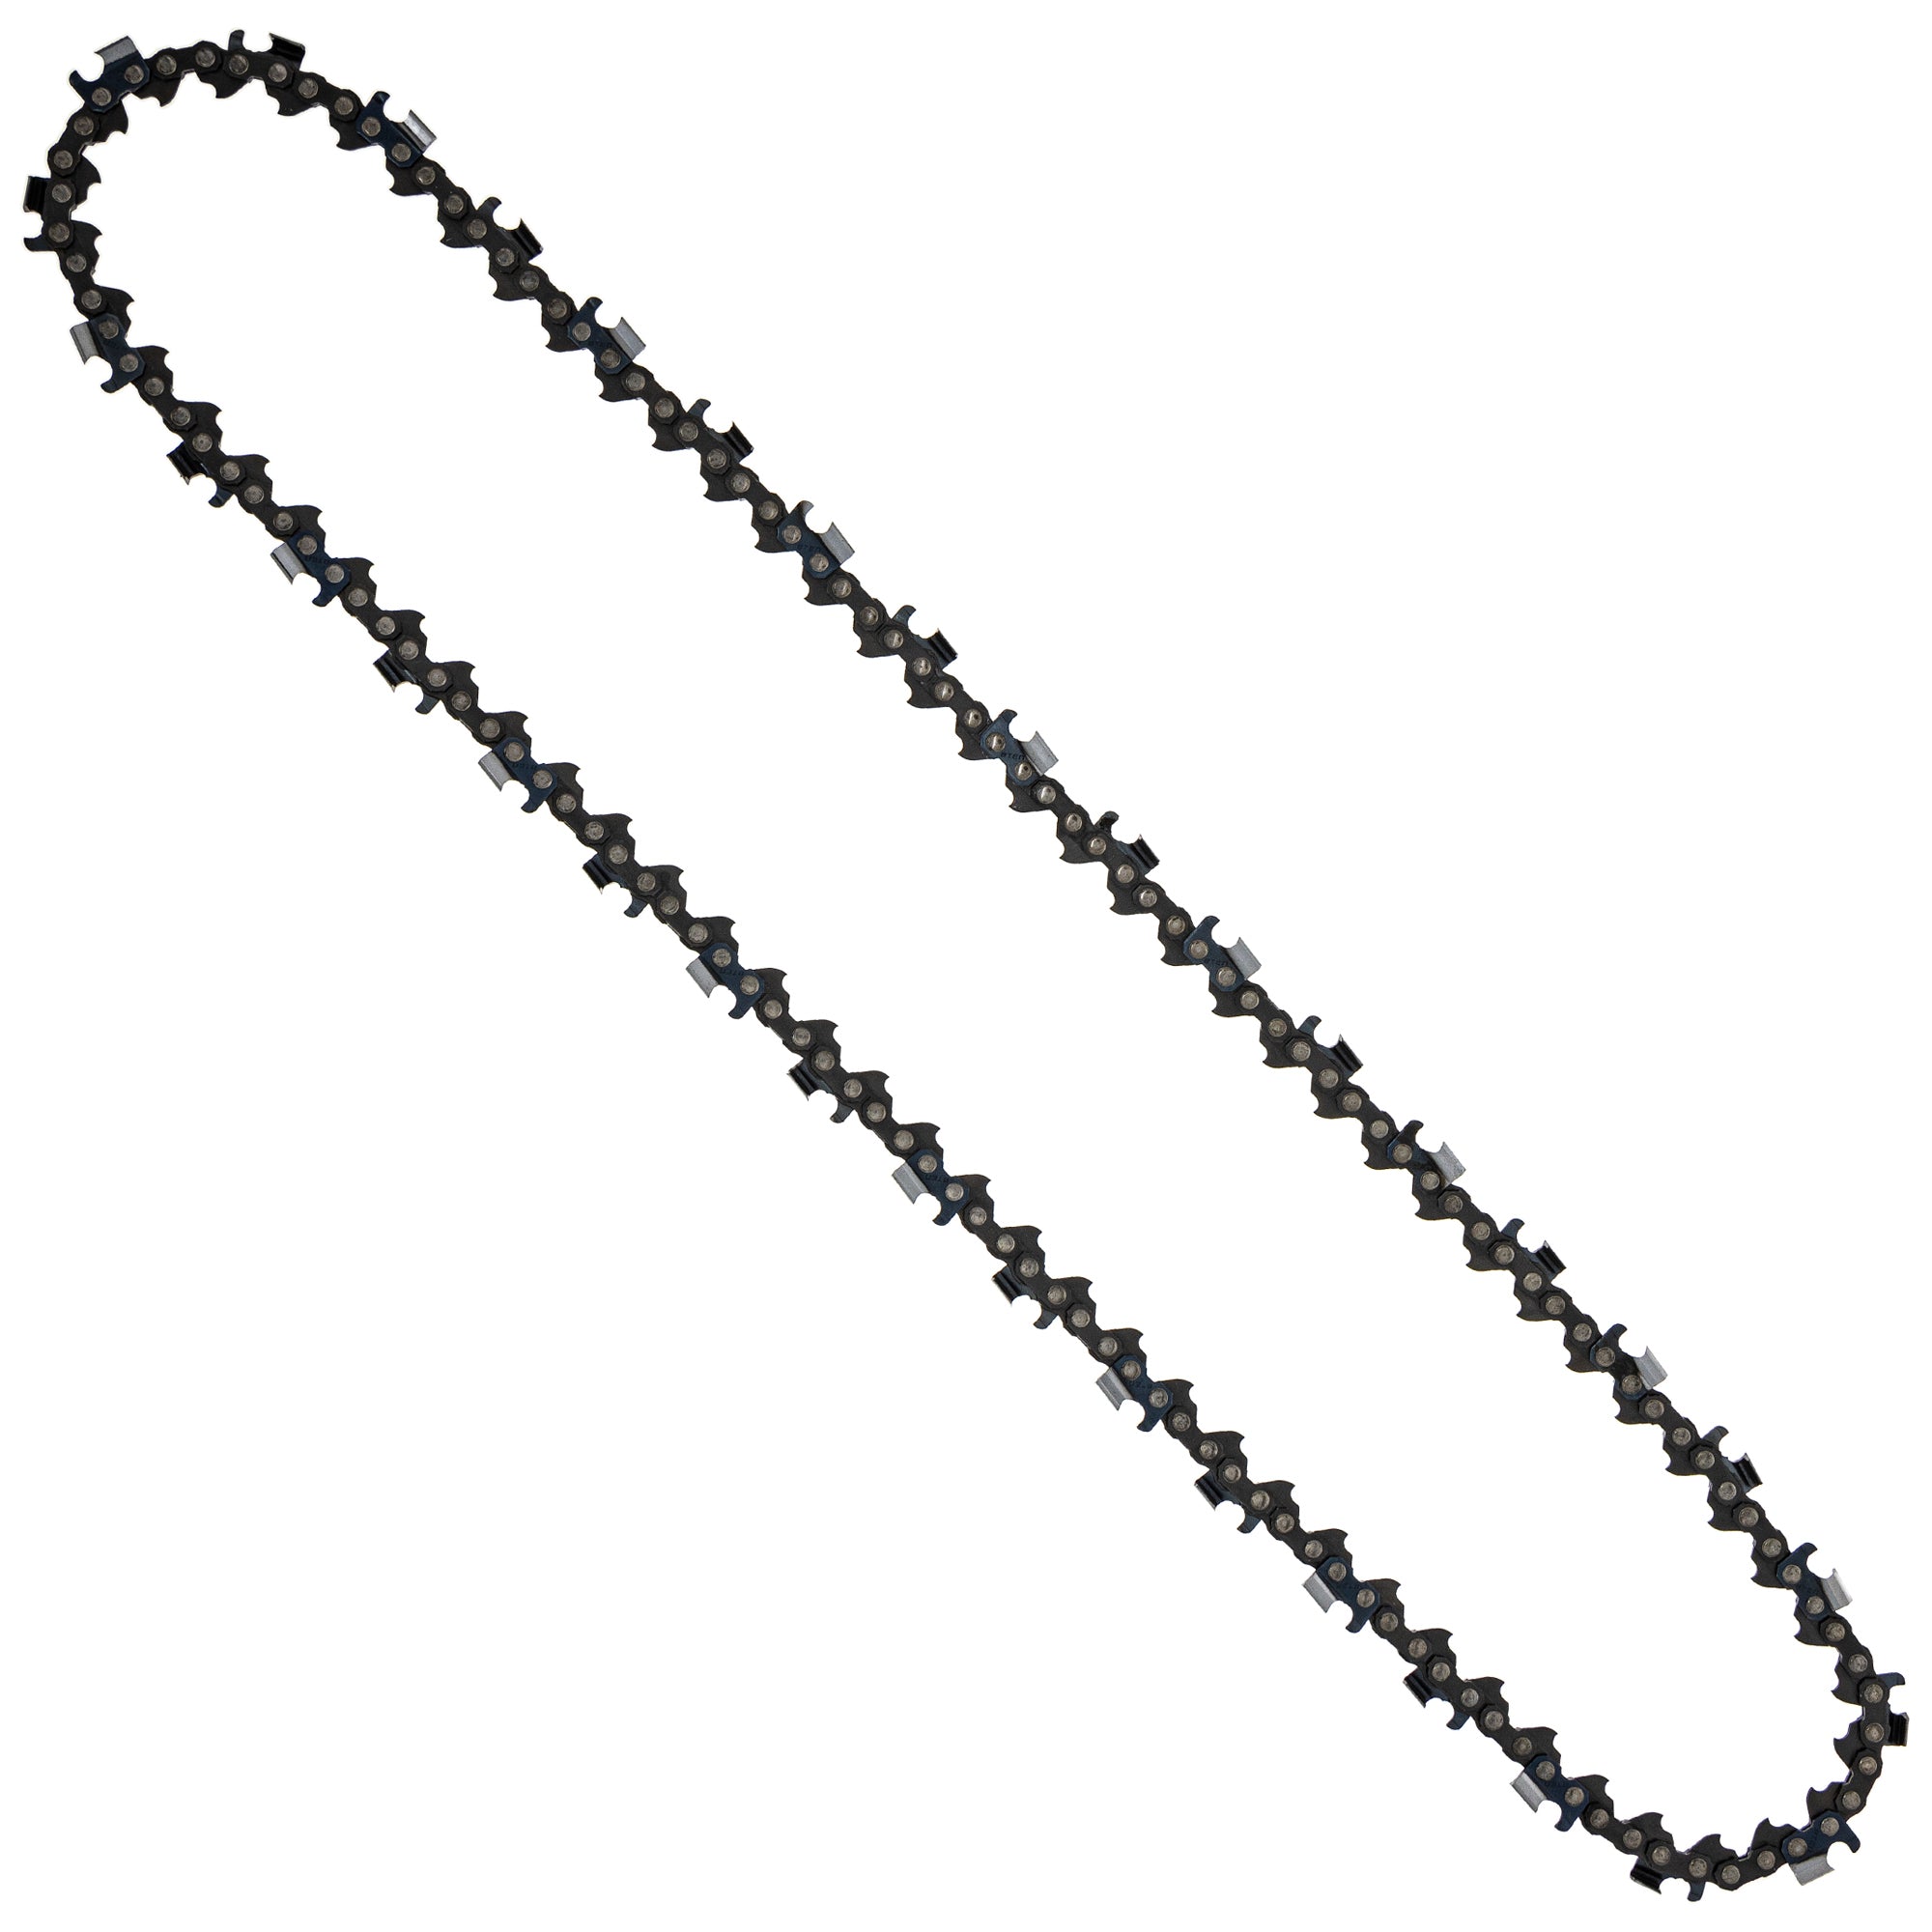 8TEN 810-CCC2255H Chain 6-Pack for zOTHER Ref No Oregon Husqvarna